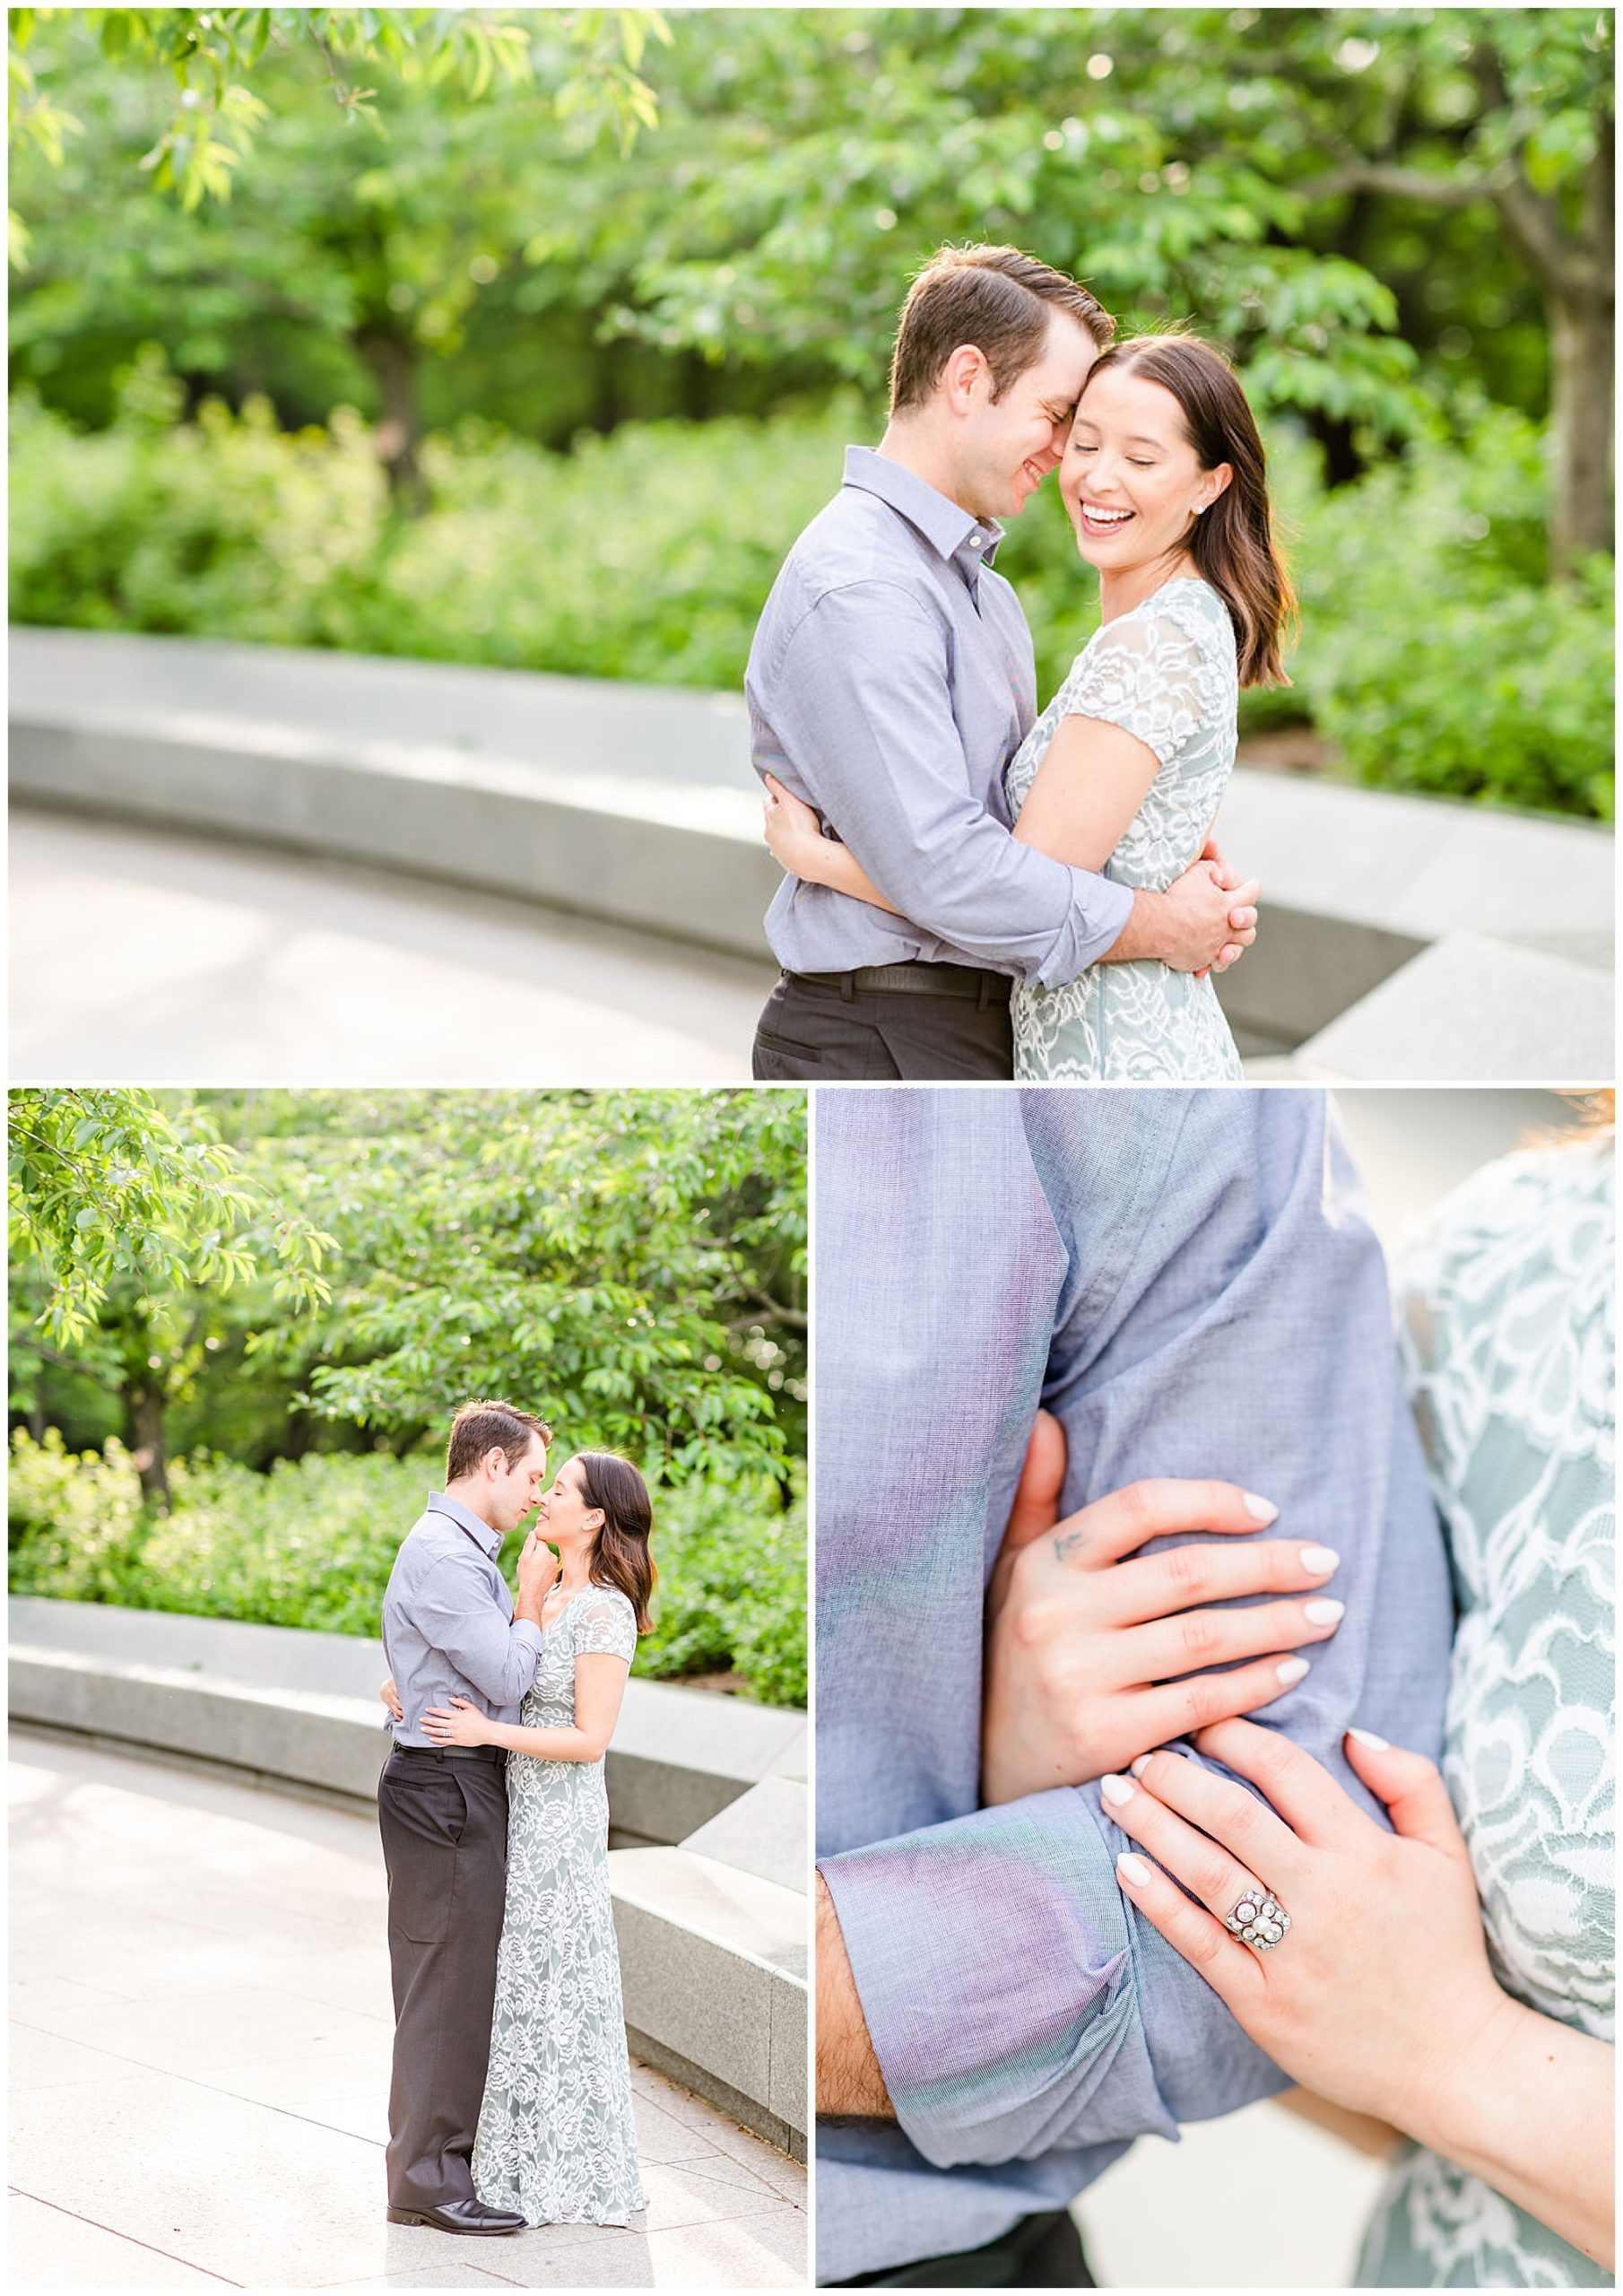 pink sunrise Lincoln Memorial engagement, DC engagement session, DC engagement photographer, formal DC engagement photos, DC elopement photographer, DC wedding photographer, classic DC engagement photos, luxury DC engagement photographer, Rachel E.H. Photography, man holding woman's chin, blue lace dress, woman smiling